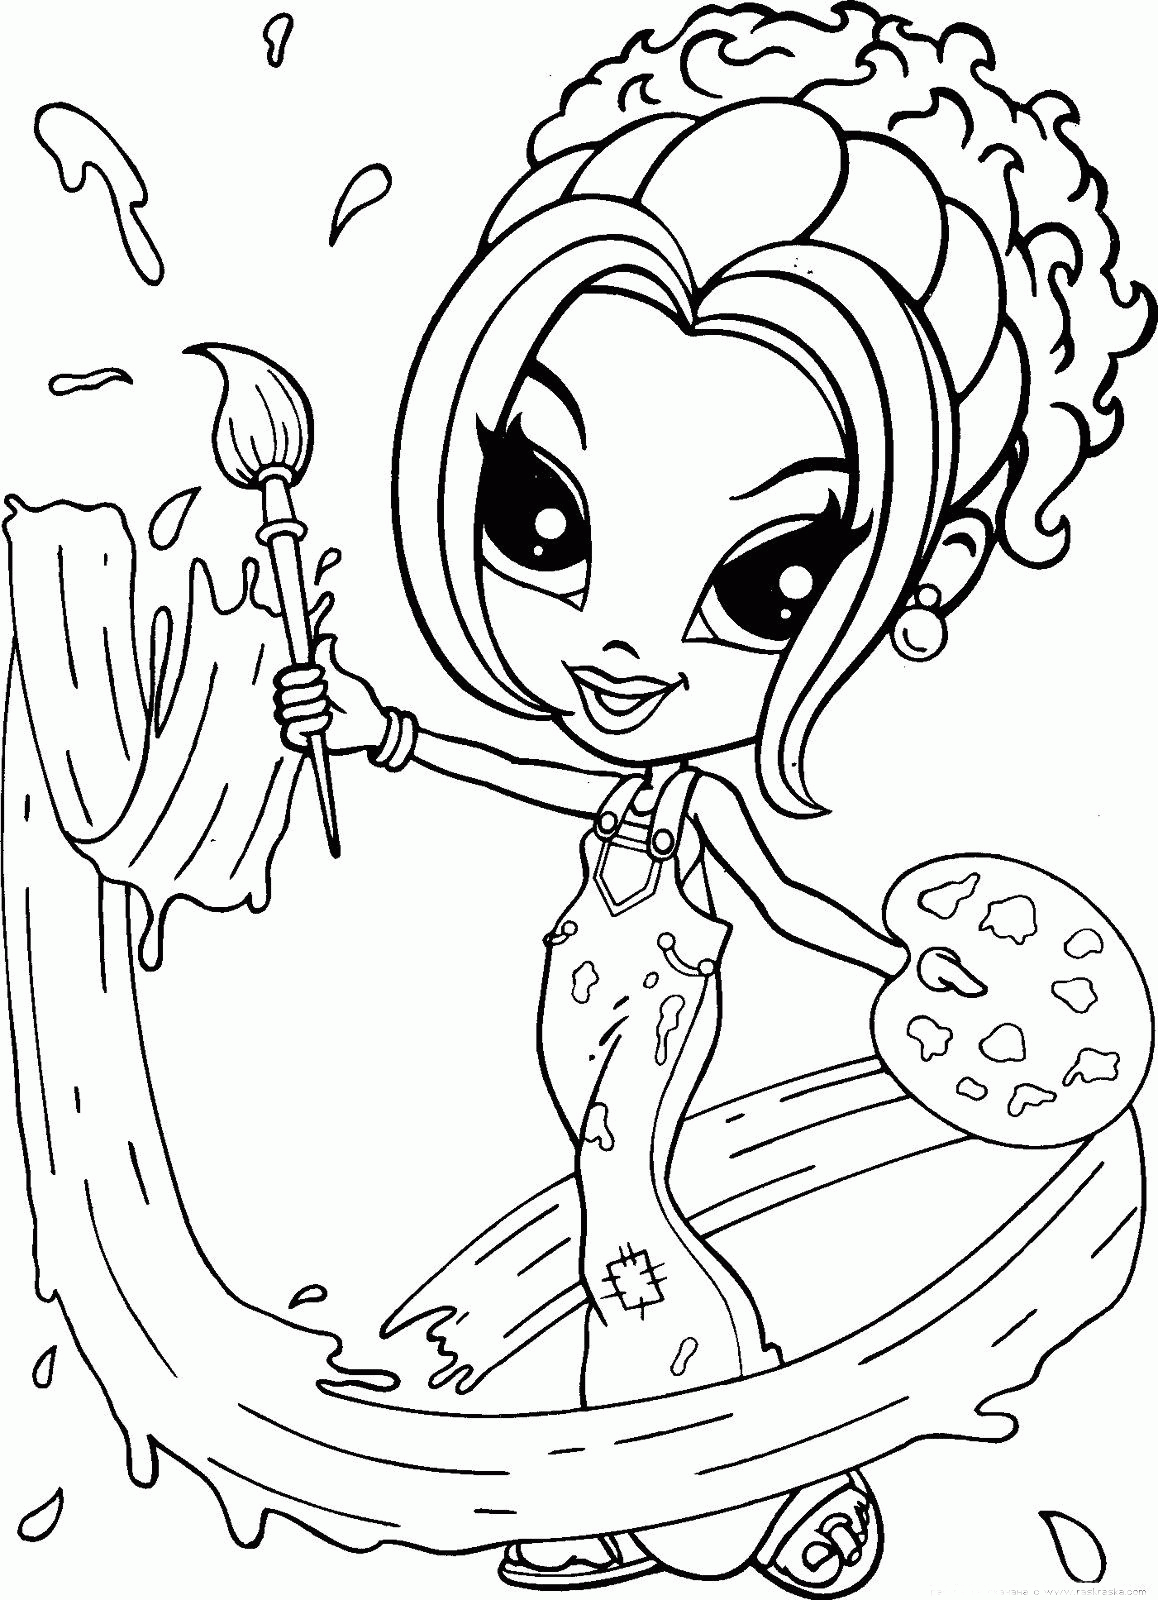 Lisa Frank Artist Coloring Pages